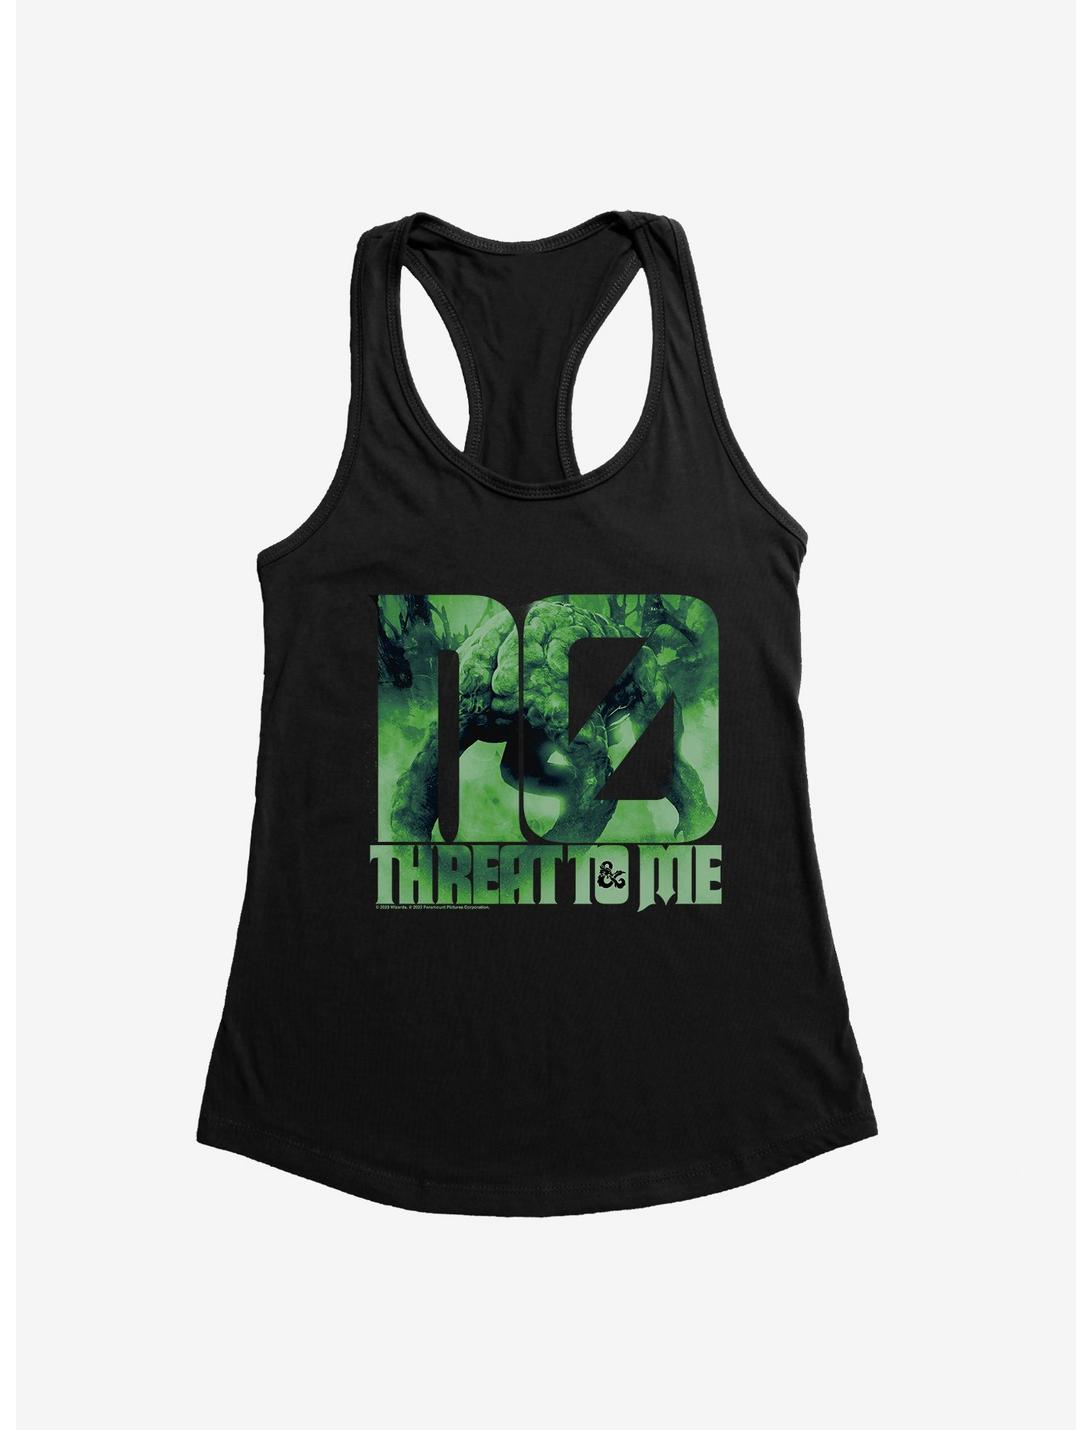 Dungeons & Dragons: Honor Among Thieves No Threat To Me Girls Tank, BLACK, hi-res